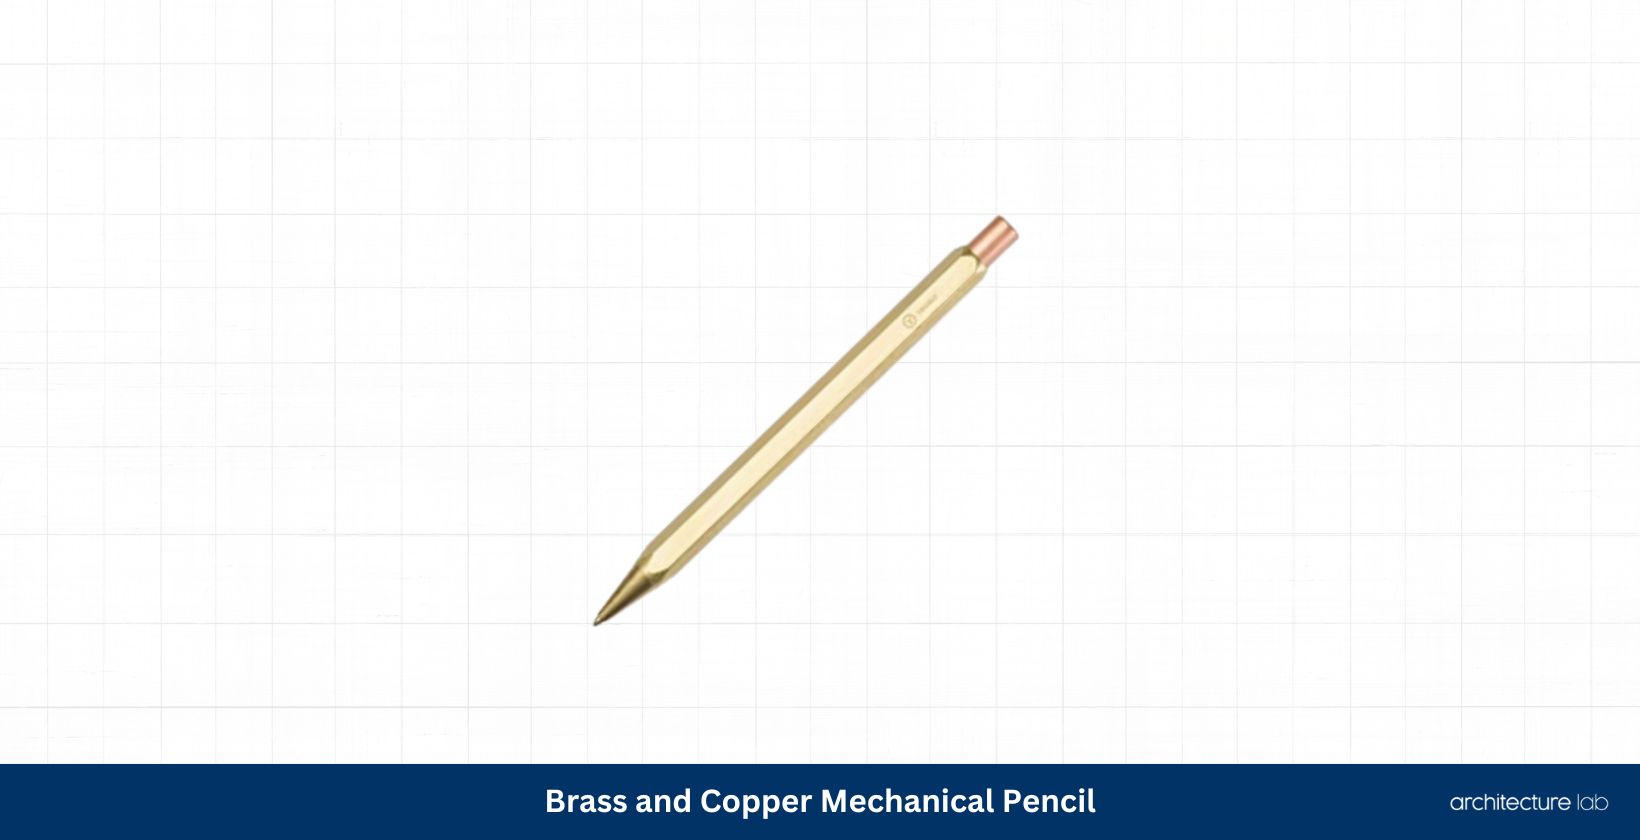 Brass and copper mechanical pencil